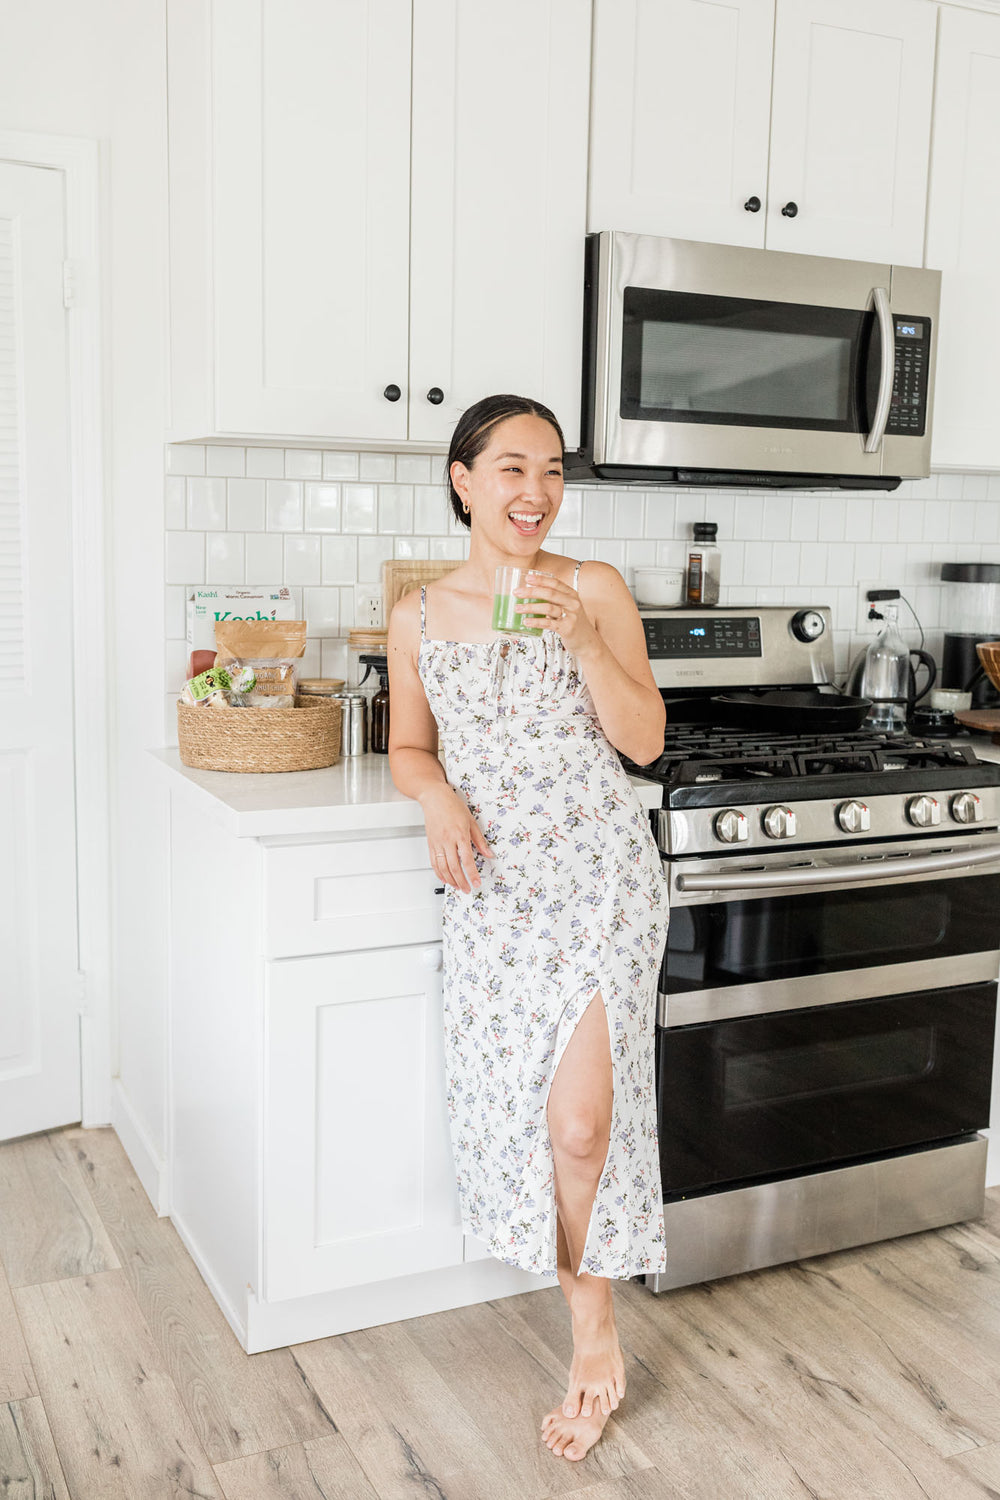 Influencer and LA-Based Mom, Eunice Park, Shares Her No-Fail Morning Self-Care Routine